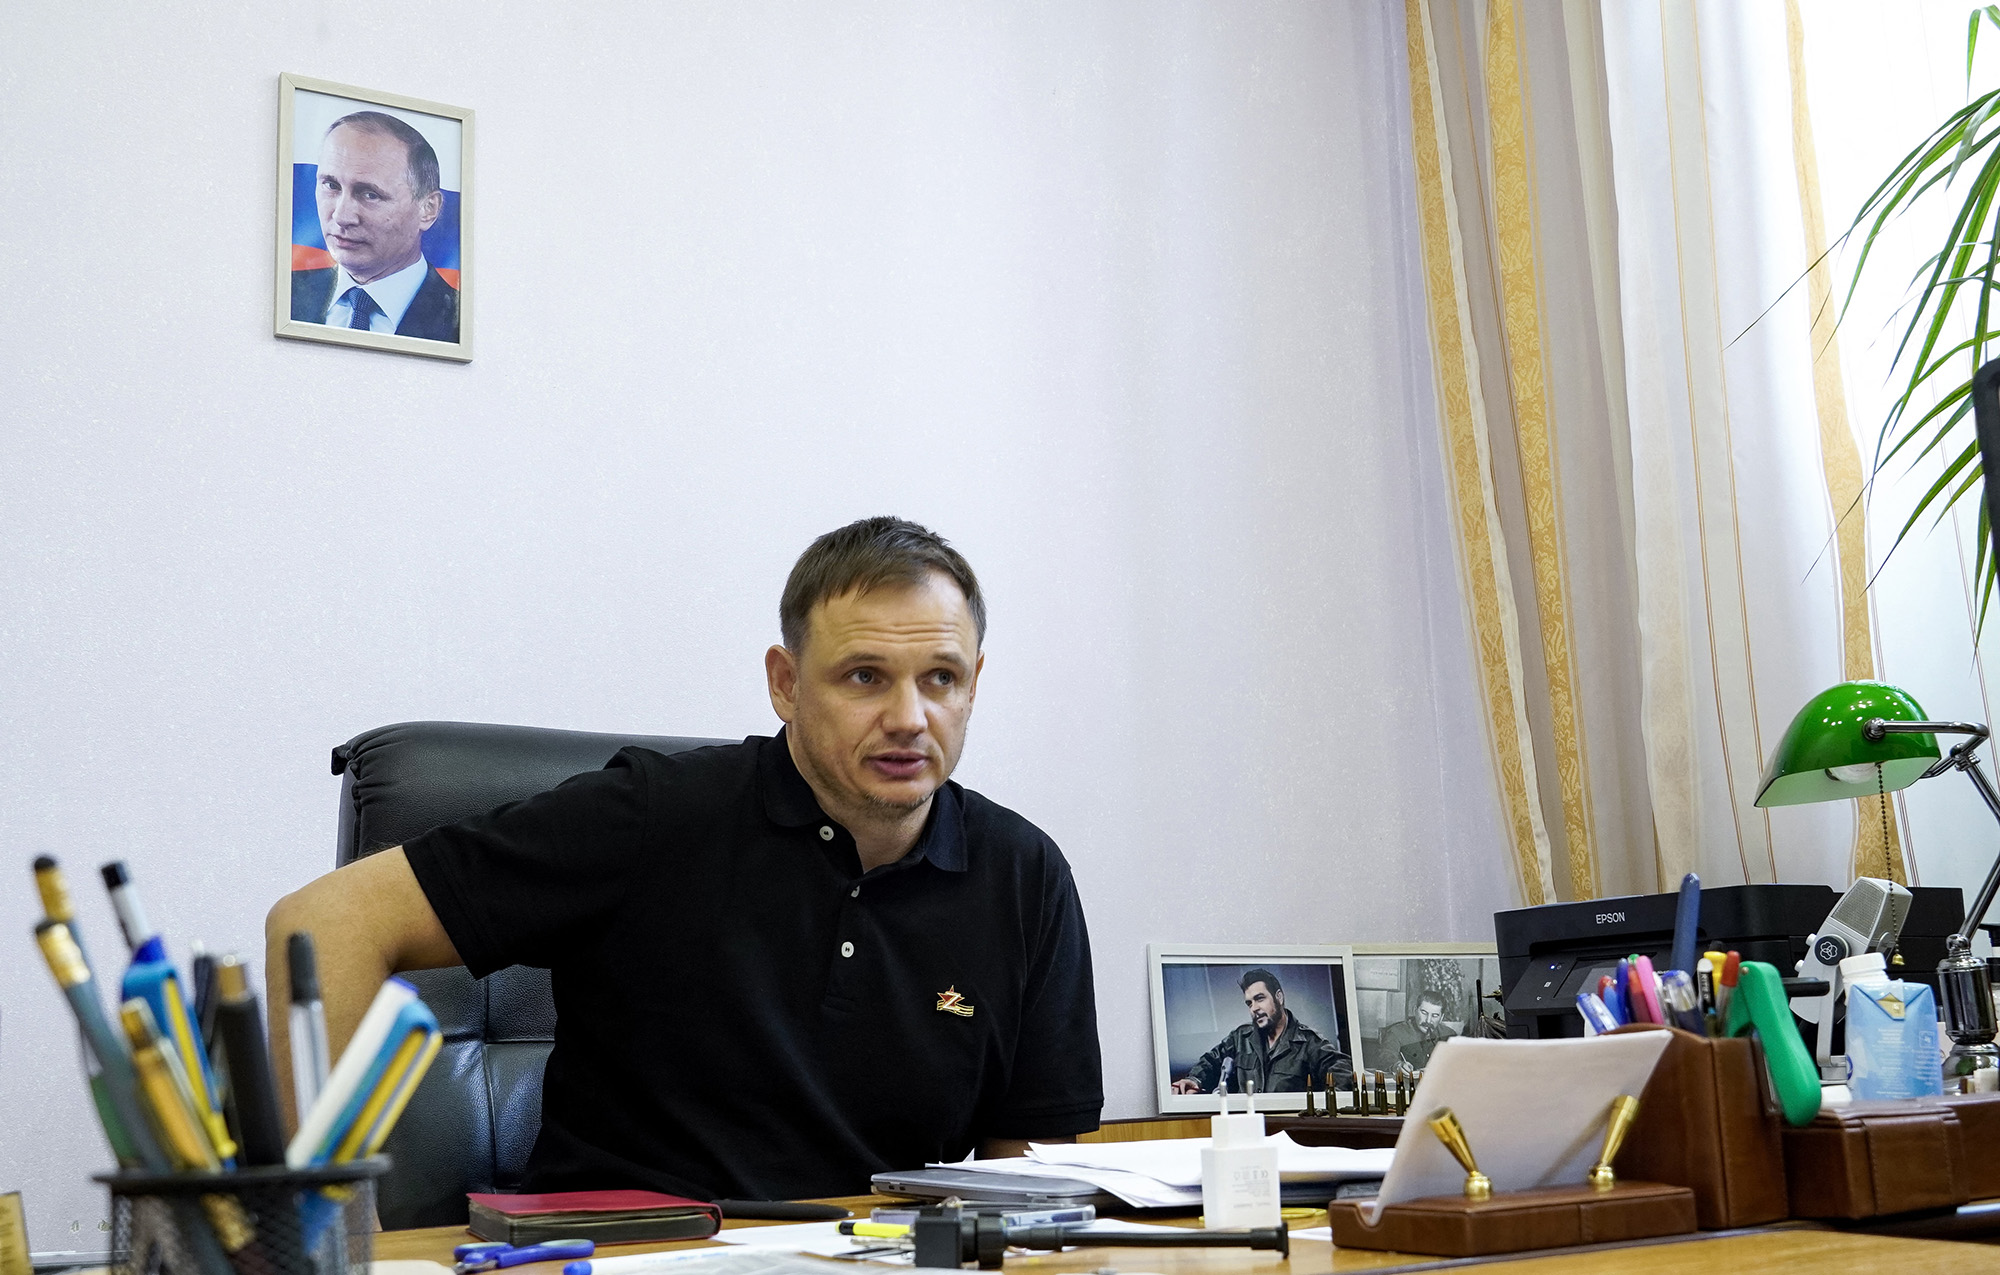 Kirill Stremousov, deputy head of the Russian-backed Kherson administration, is pictured in his office in the city of Kherson, Ukraine, on July 20.